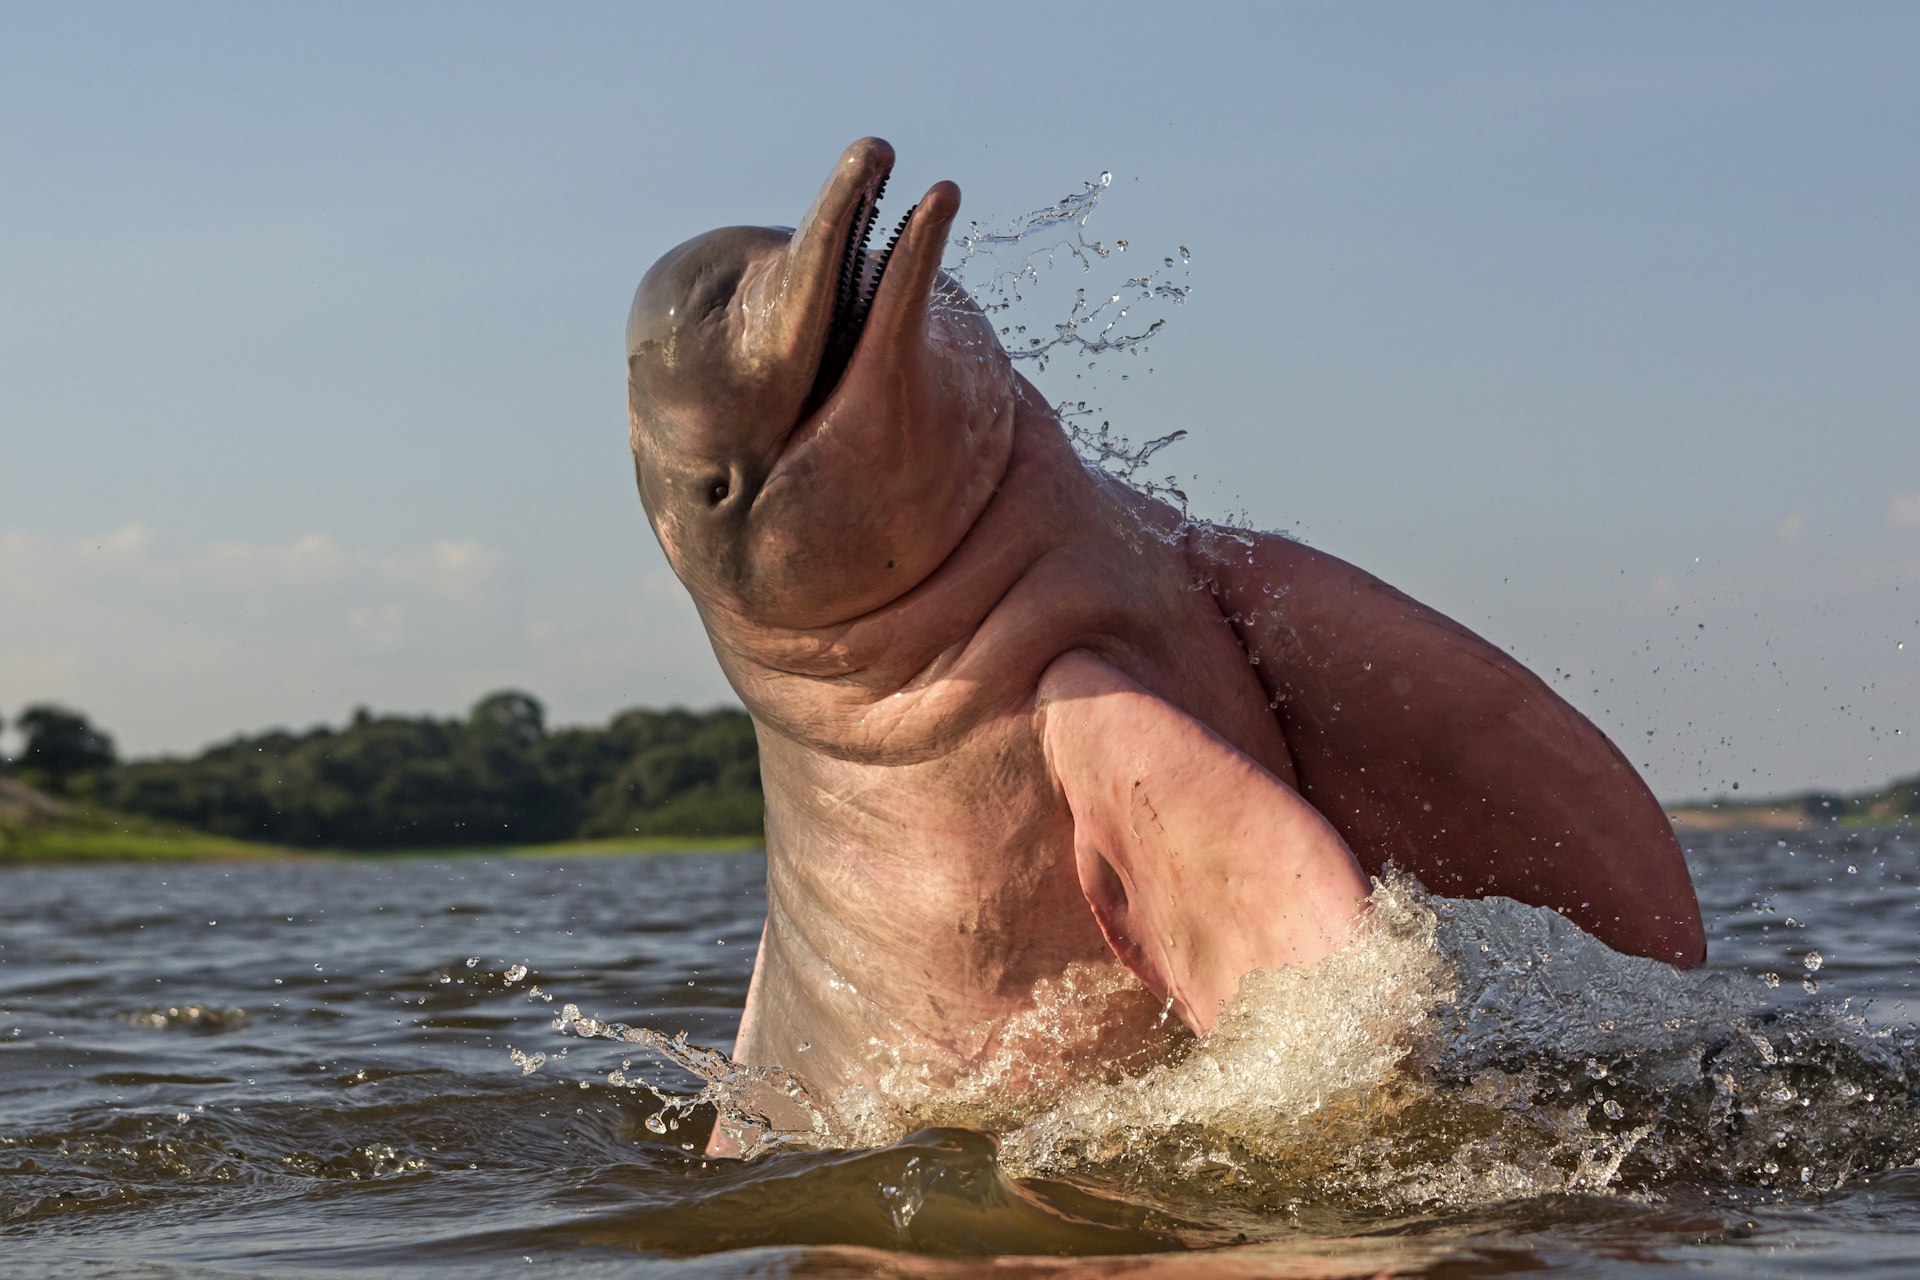 A pink dolphin emerges from the waters of the Amazon, Manuas, Brazil